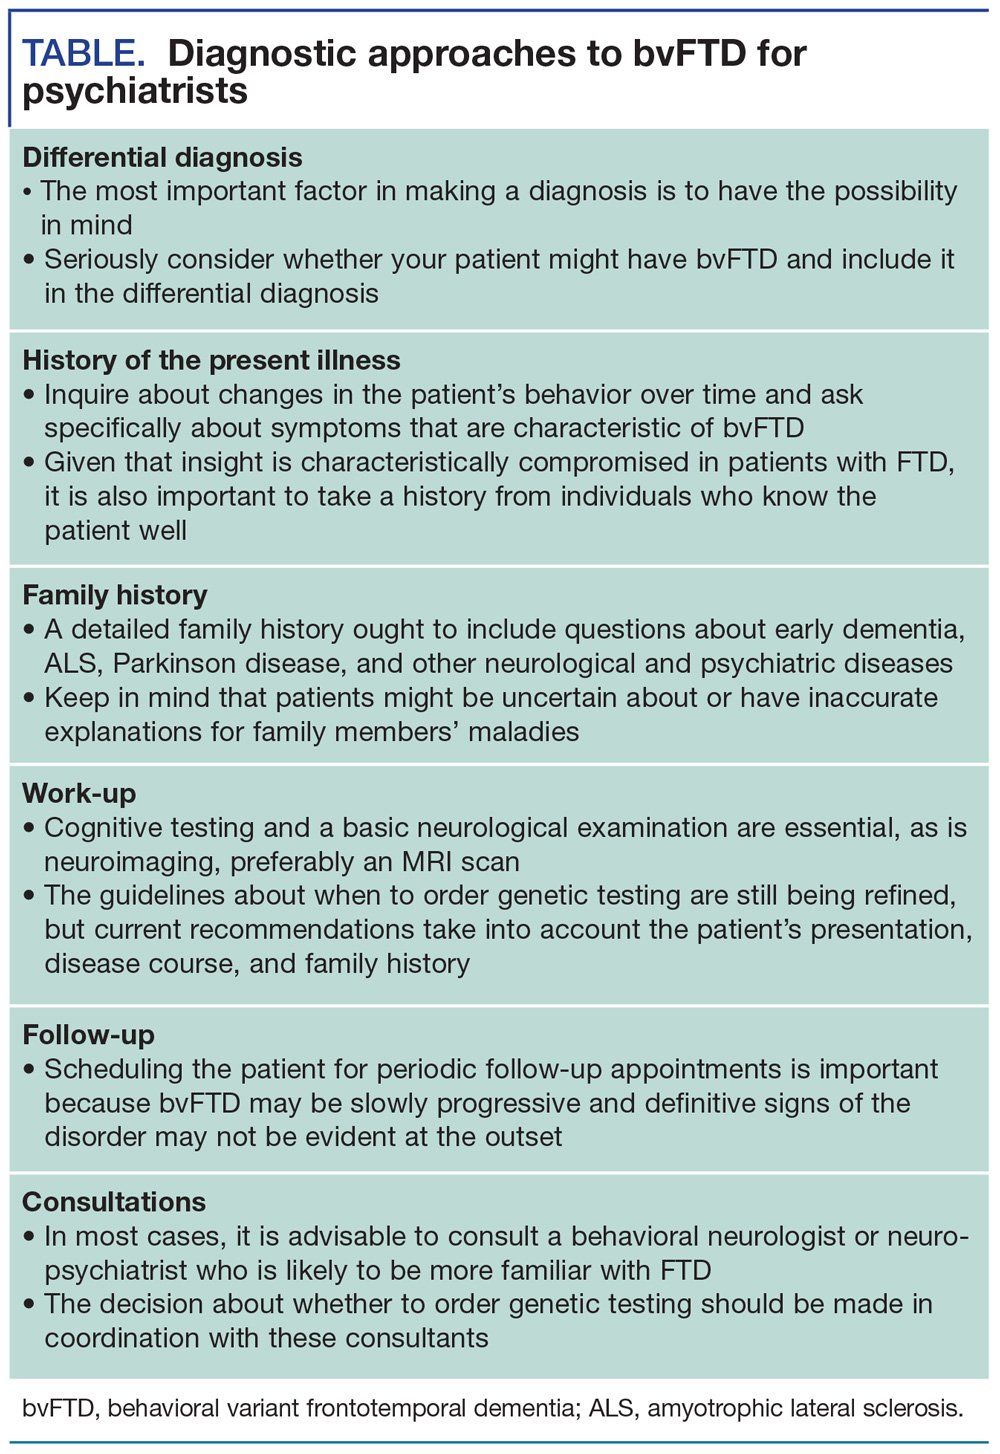 Diagnostic approaches to bvFTD for psychiatrists